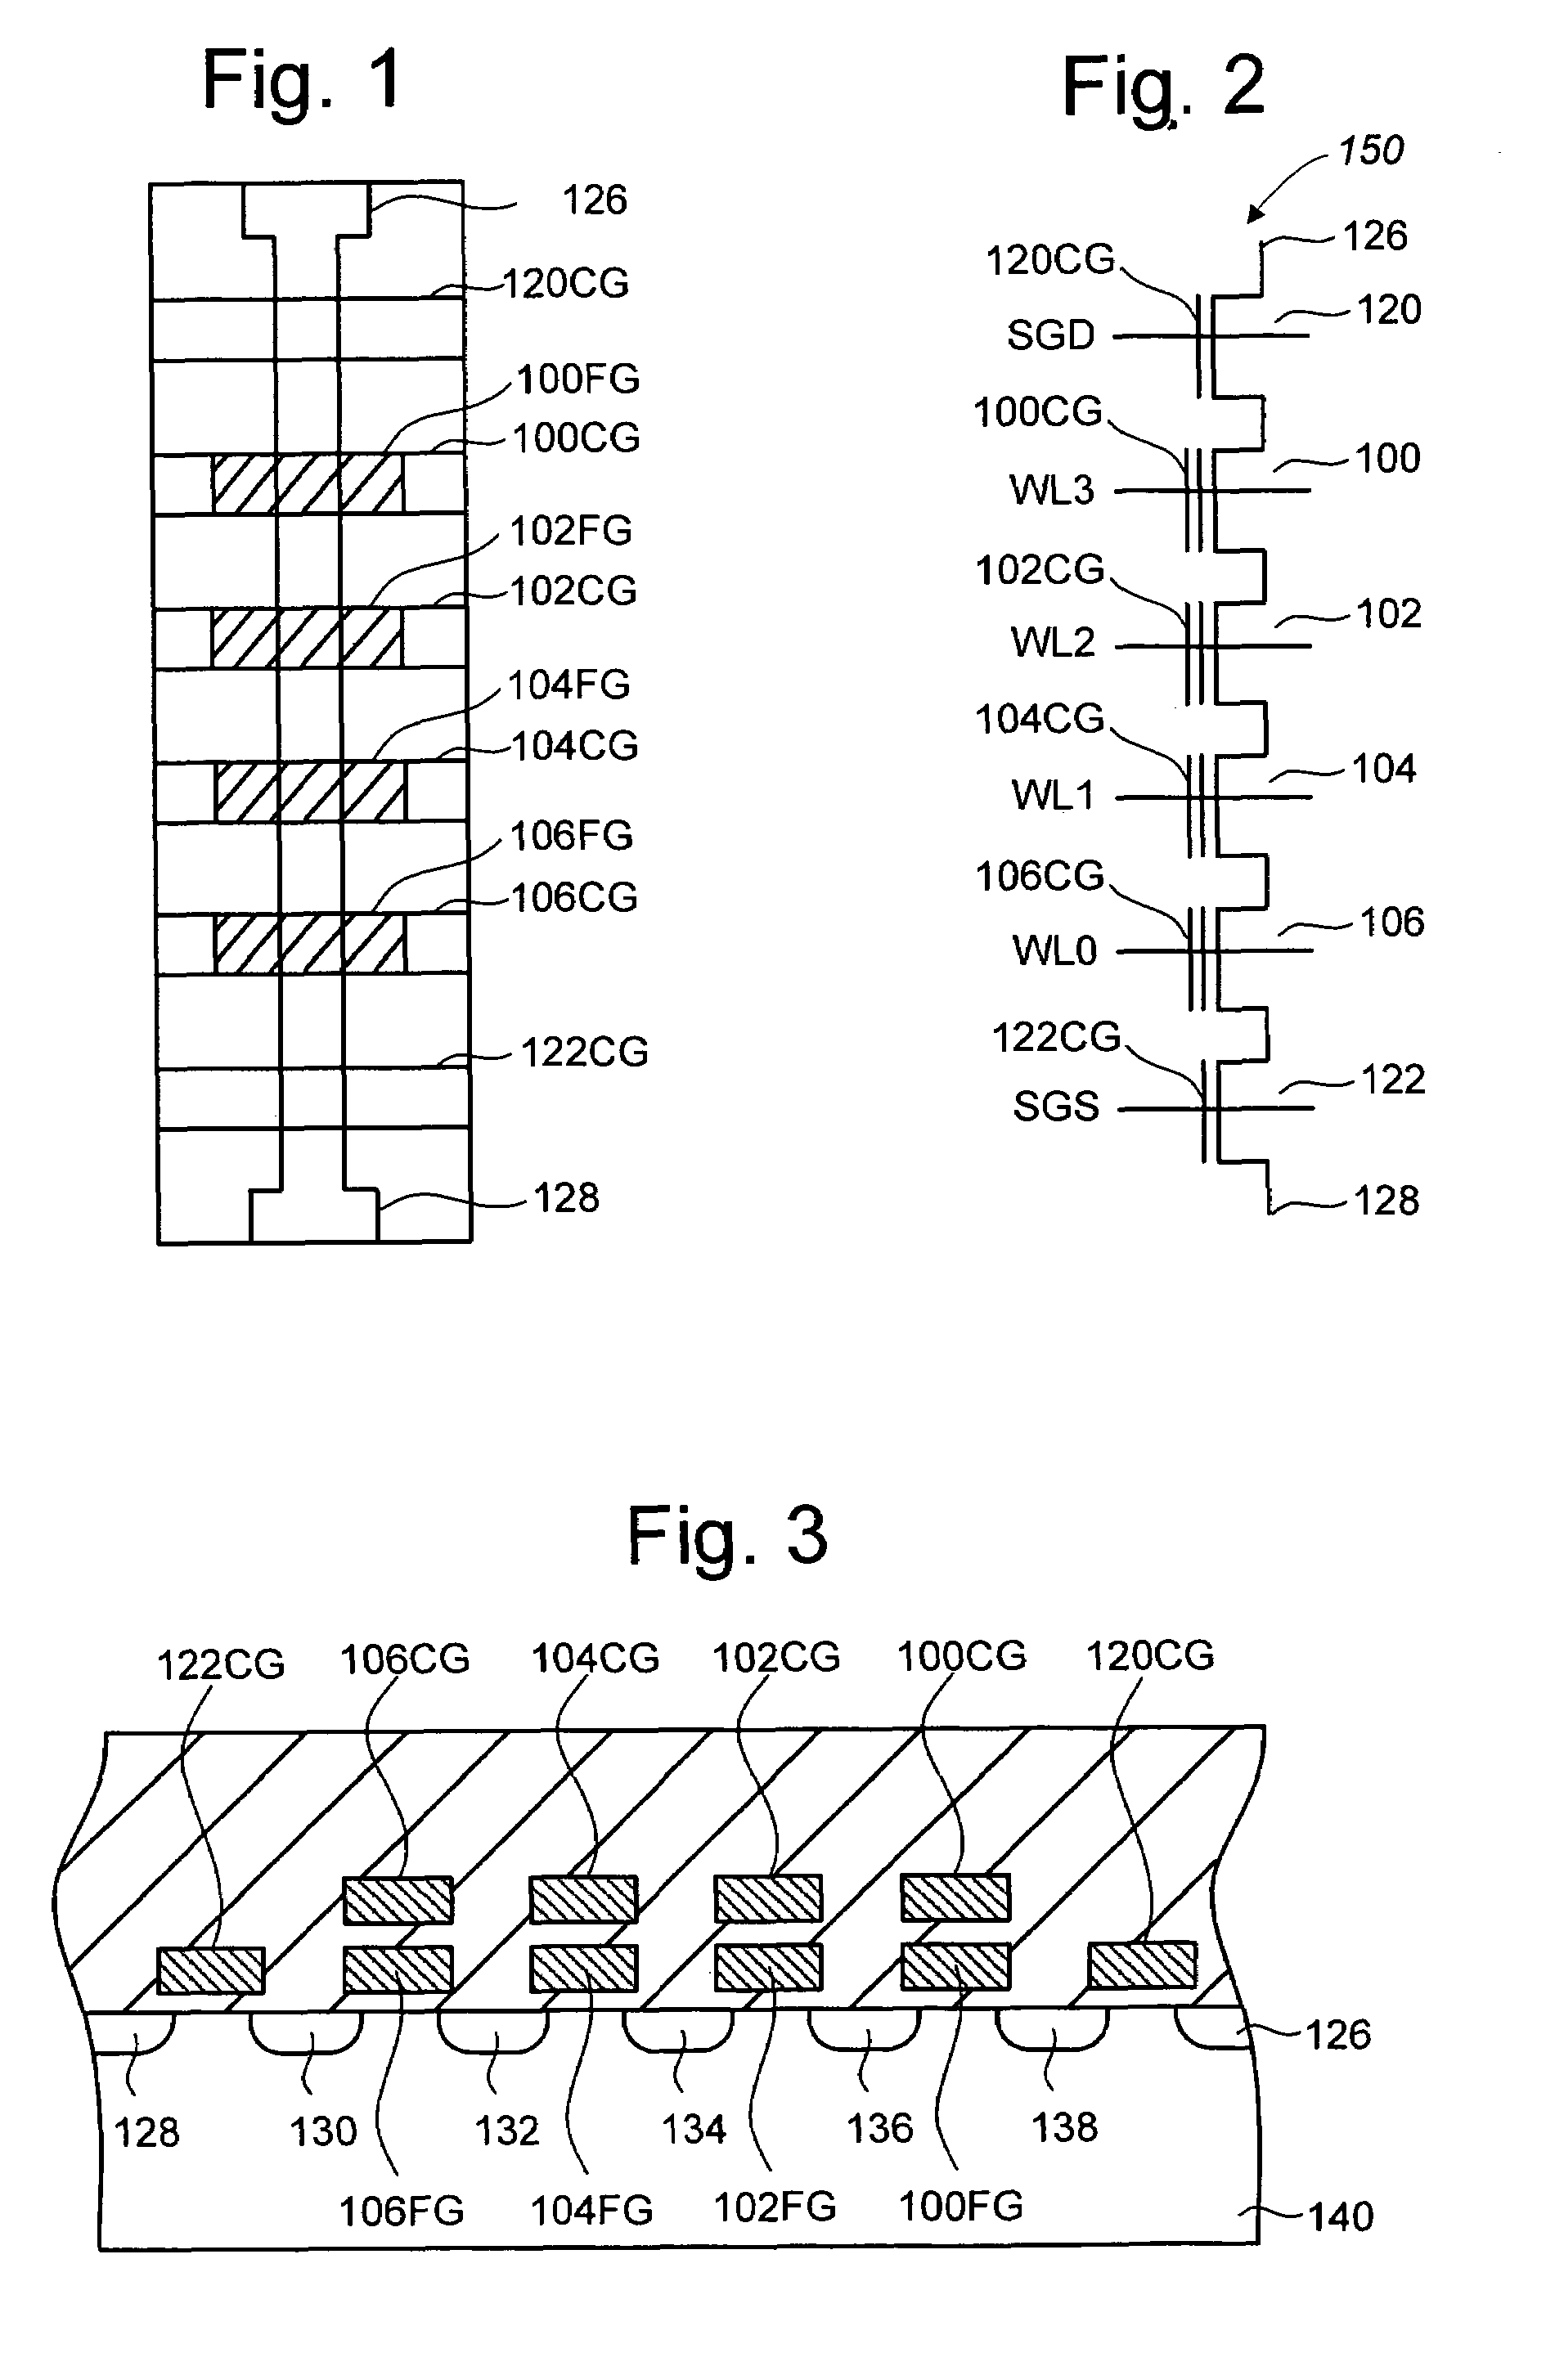 Compensating for coupling during read operations of non-volatile memory